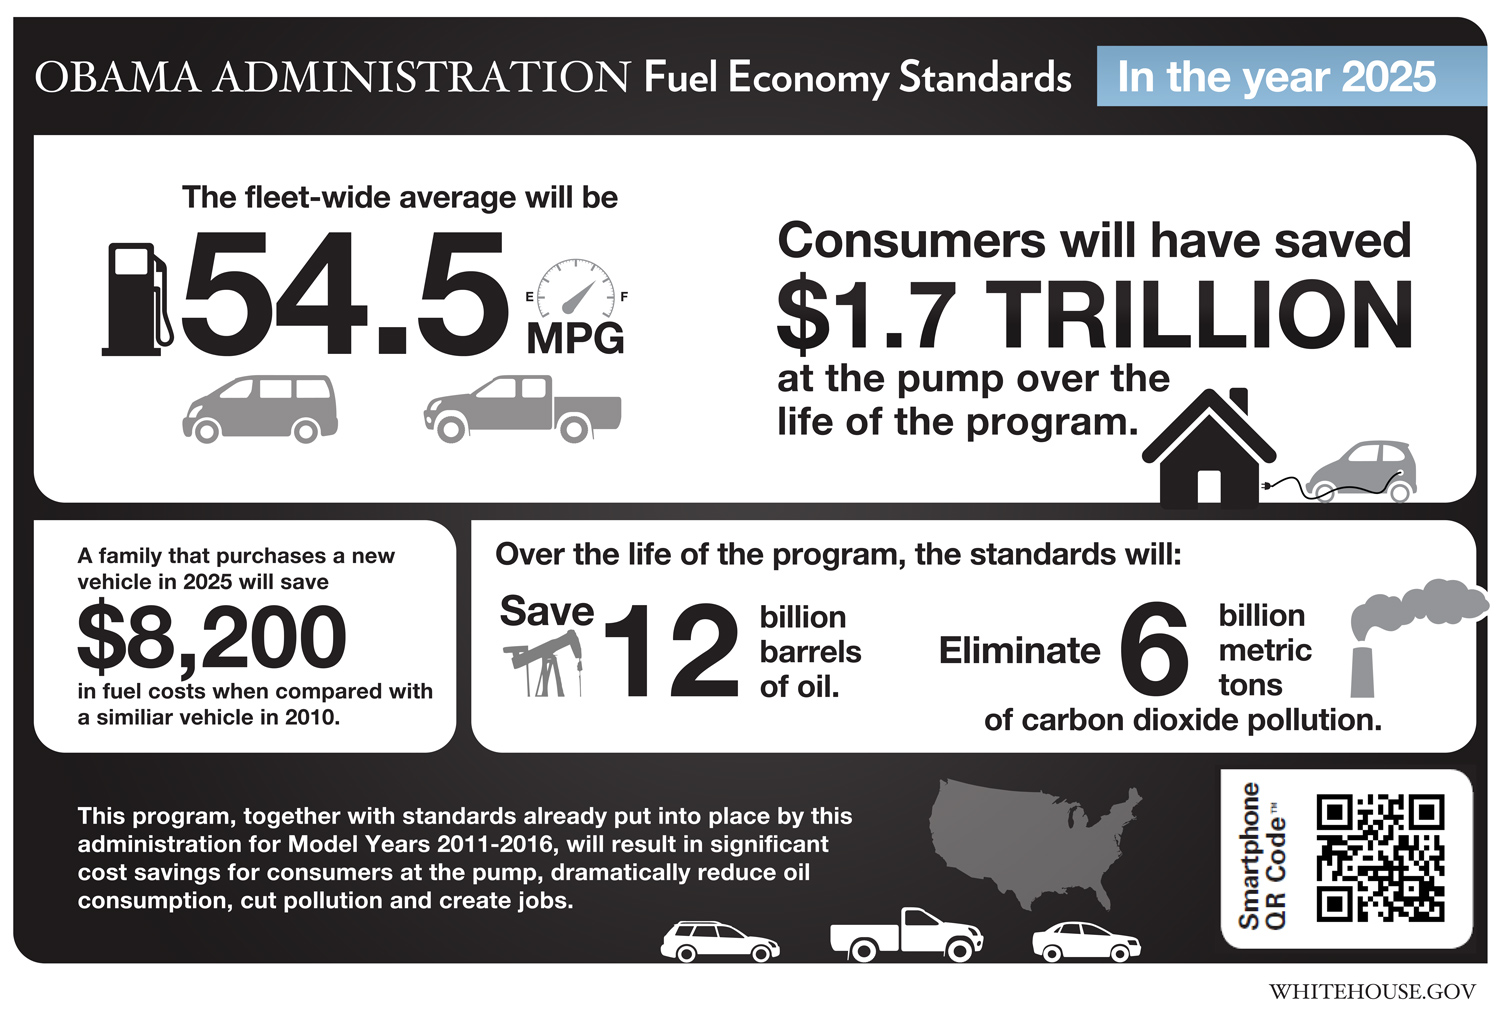 infographic_fuel_economy_standards_final_small.jpg